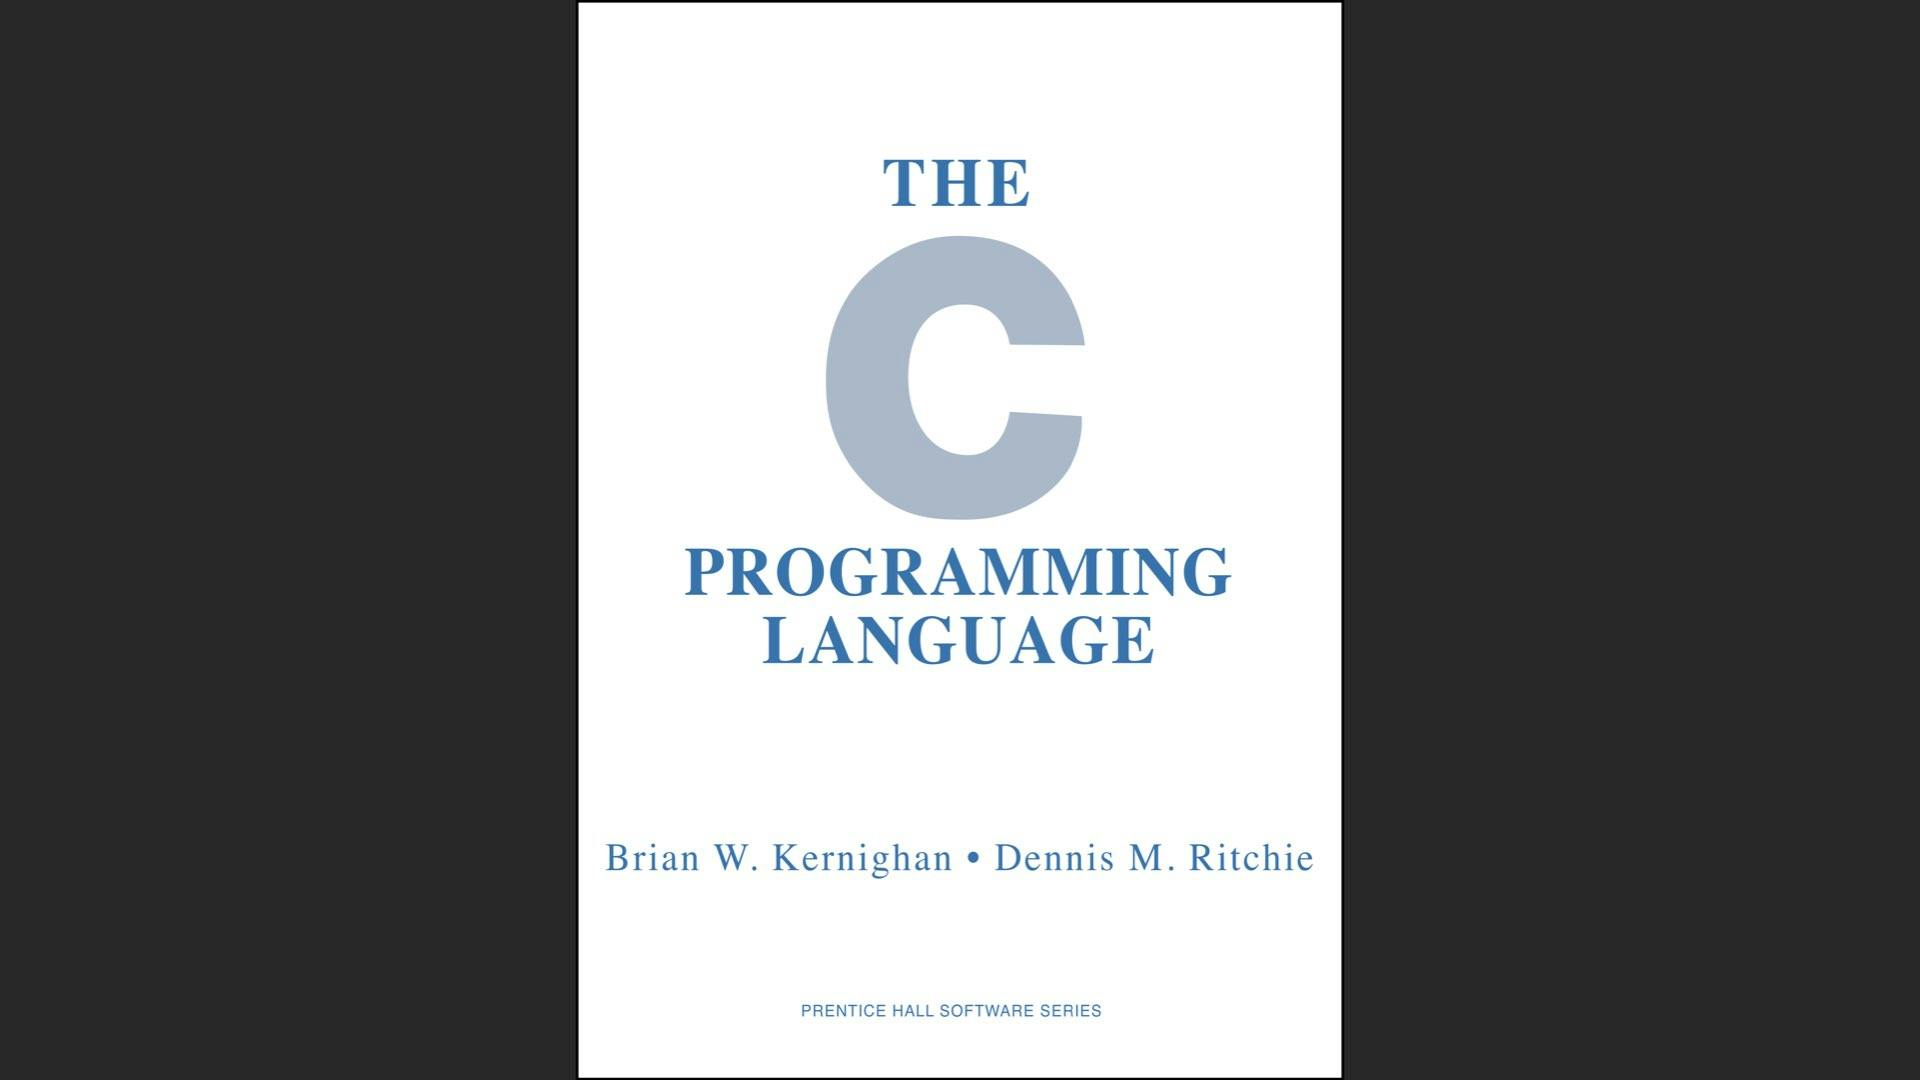 The slide shows the C Programming Language book cover. It is uncertain if historians will conclude that the publishing of this book was a good thing or a bad thing for the human race.